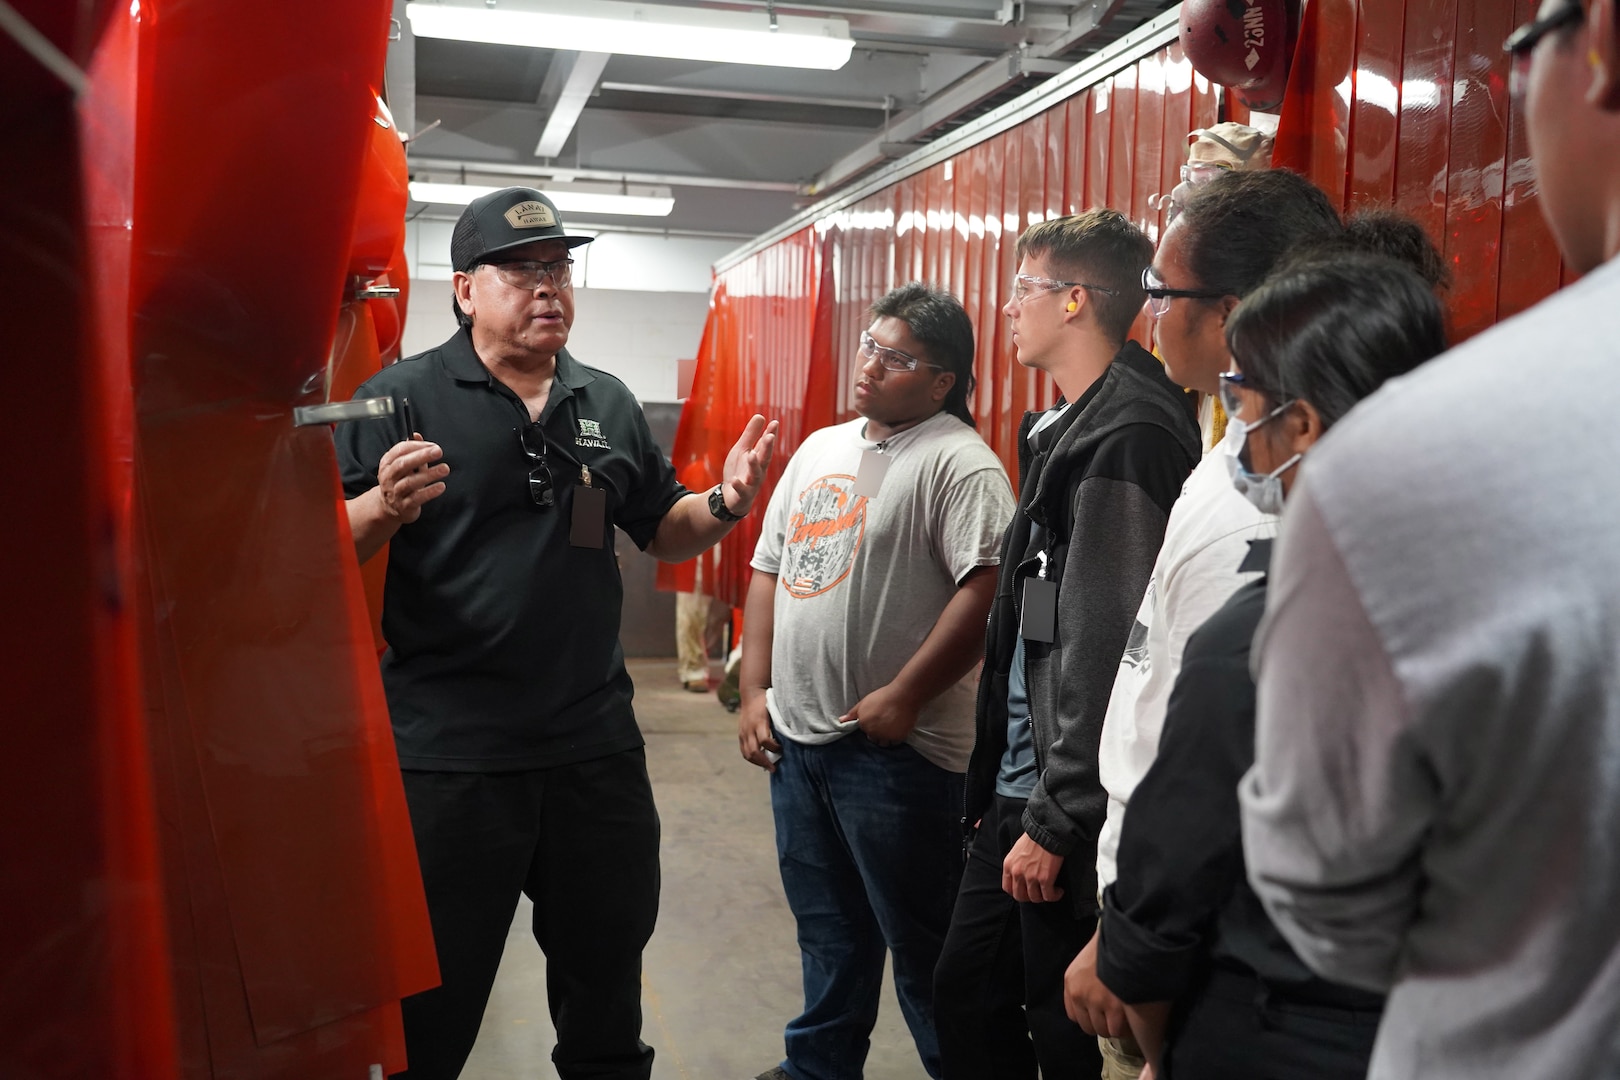 Randal Amoncio (left), an apprentice instructor for Pearl Harbor Naval Shipyard and Intermediate Maintenance Facility (PHNSY & IMF) describes the various welding skills taught in the shipyard’s apprentice program to James Campbell High School students during a career-oriented field trip held in mid-April. This event is one of several PHNSY & IMF community outreach programs conducted with local schools. The visit gathered 26 students and three teachers from the school’s Science, Technology, Engineering, Arts, and Mathematics (STEAM) program that offers students insight in trade industry occupations. During the field trip, representatives from the shipyard’s Production Resource Training Department facilitated the students’ experience with a tour of its welding school including welding demonstrations and an overview of equipment and training facilities used in honing welding trade skills. (Official U.S. Navy photo by Justice M. Vannatta)